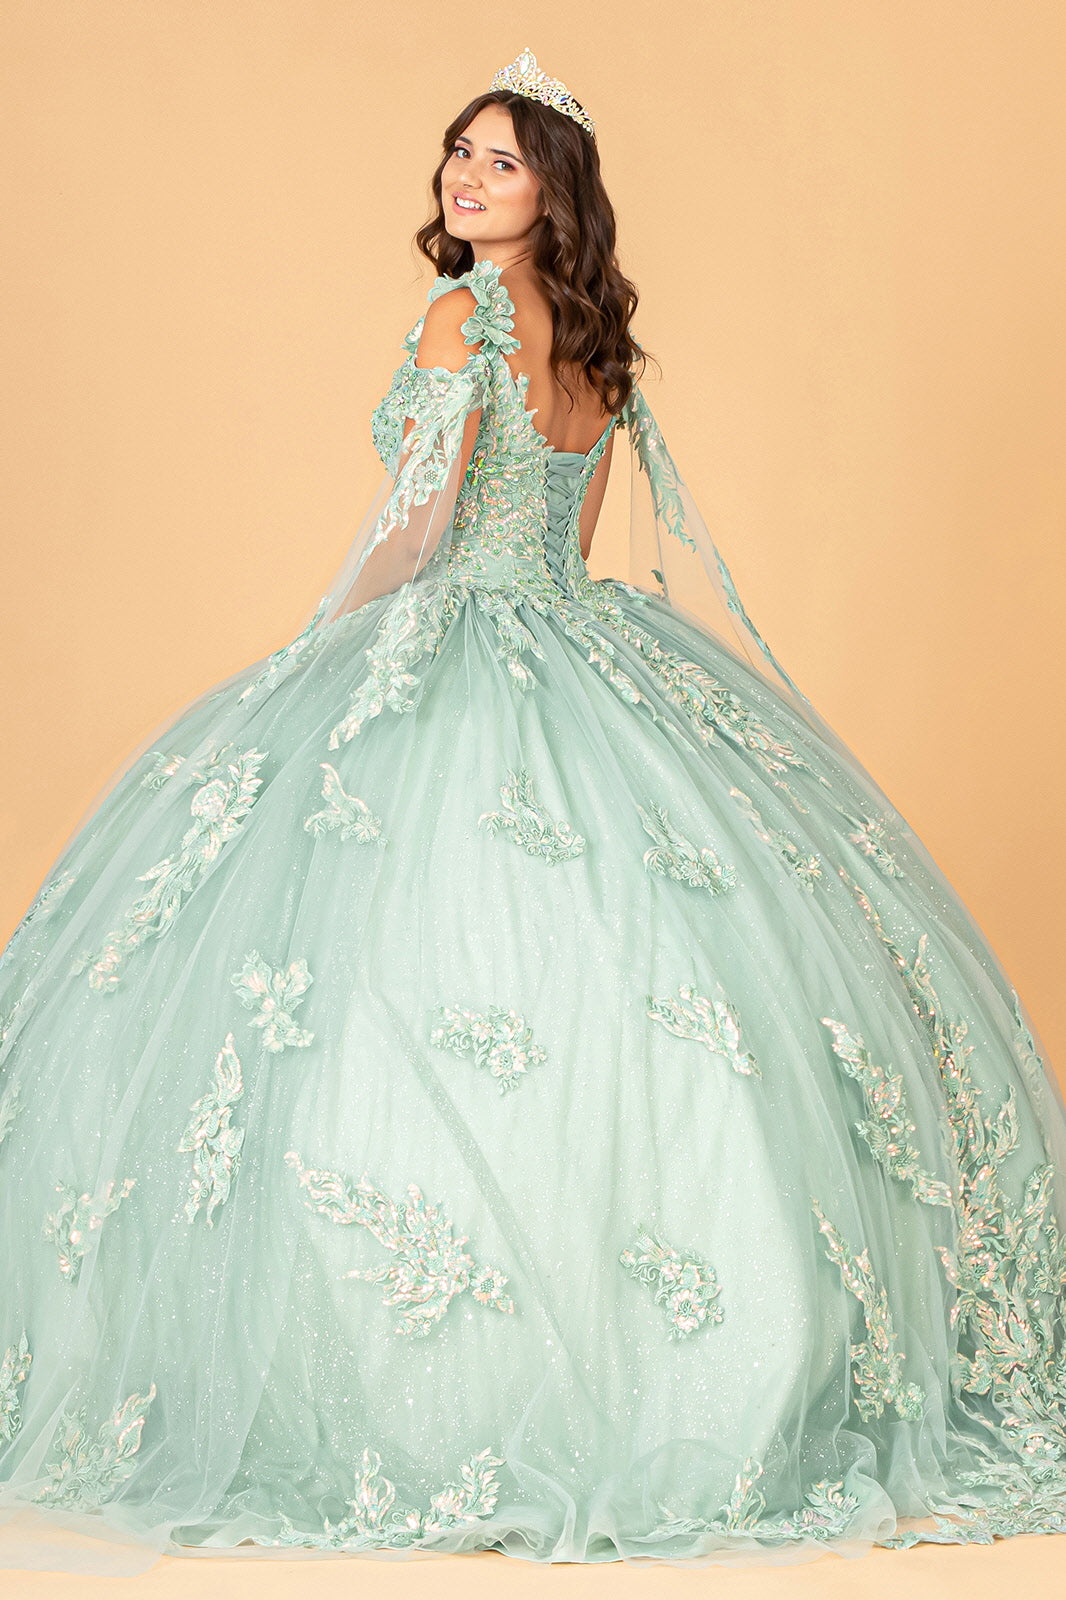 3D Flower Applique Mesh Quinceanera Ball Gown with Side Mesh Drapes GLGL3099-QUINCEANERA-smcfashion.com